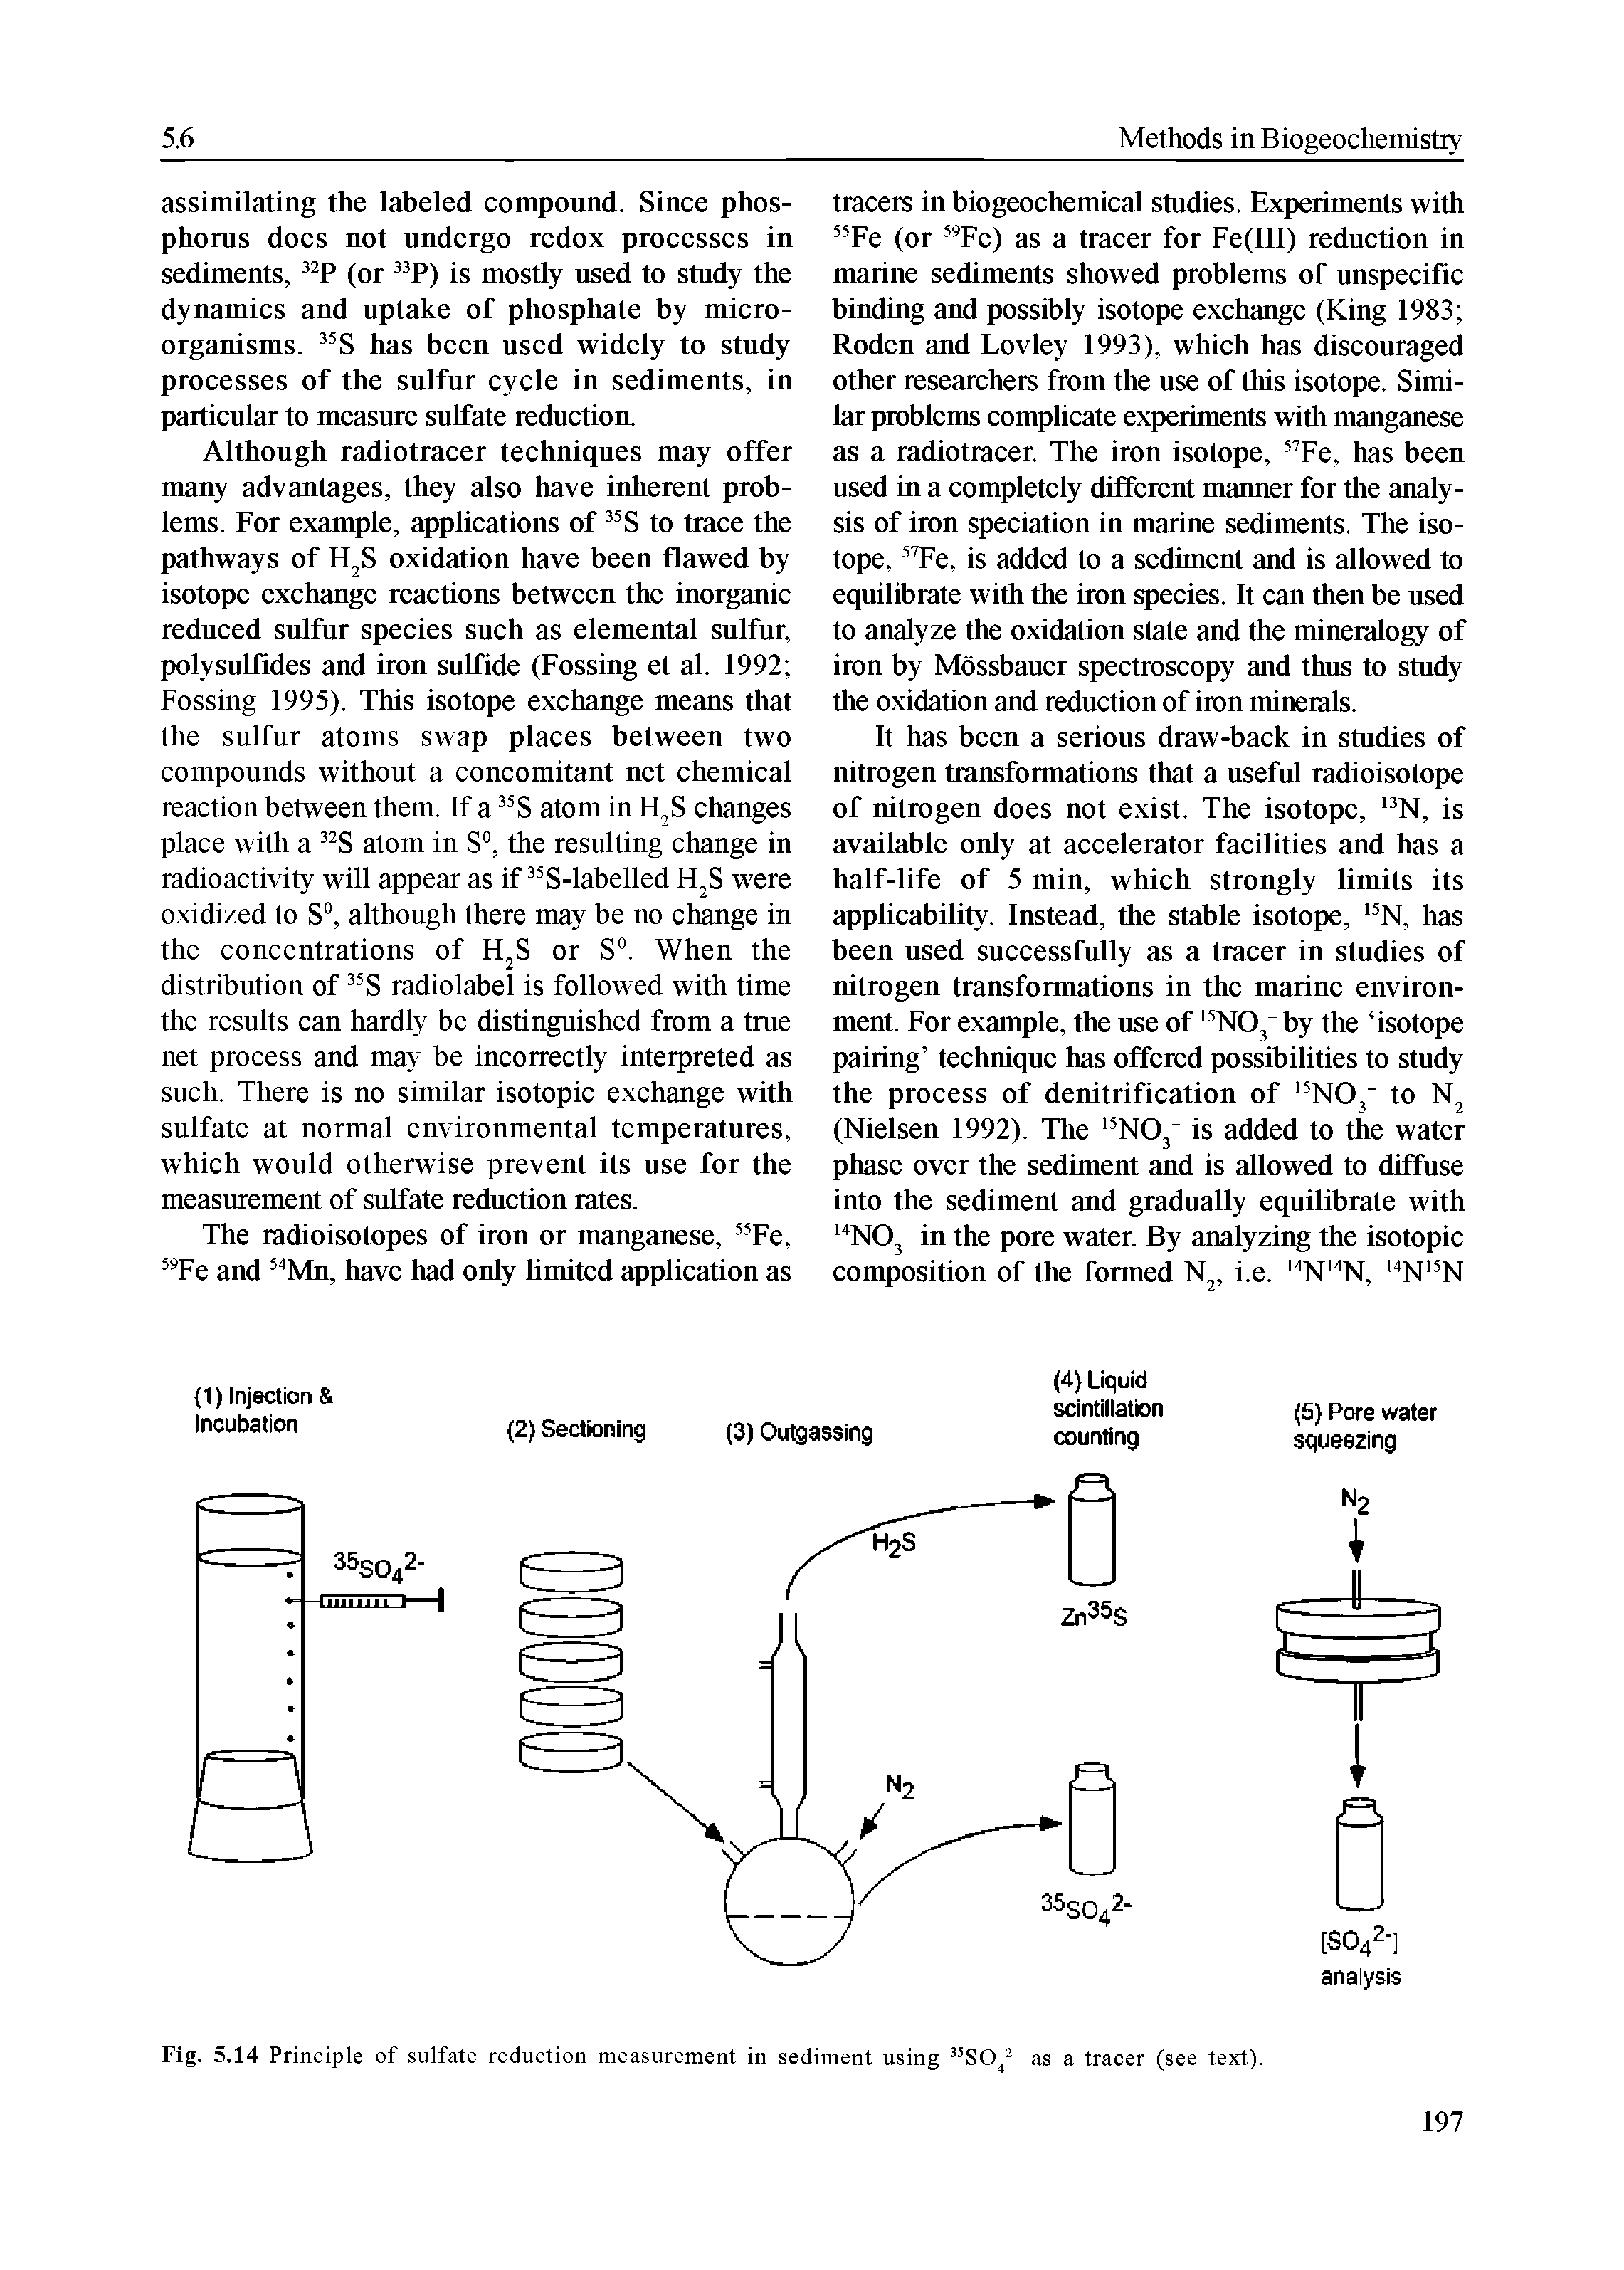 Fig. 5.14 Principle of sulfate reduction measurement in sediment using as a tracer (see text).